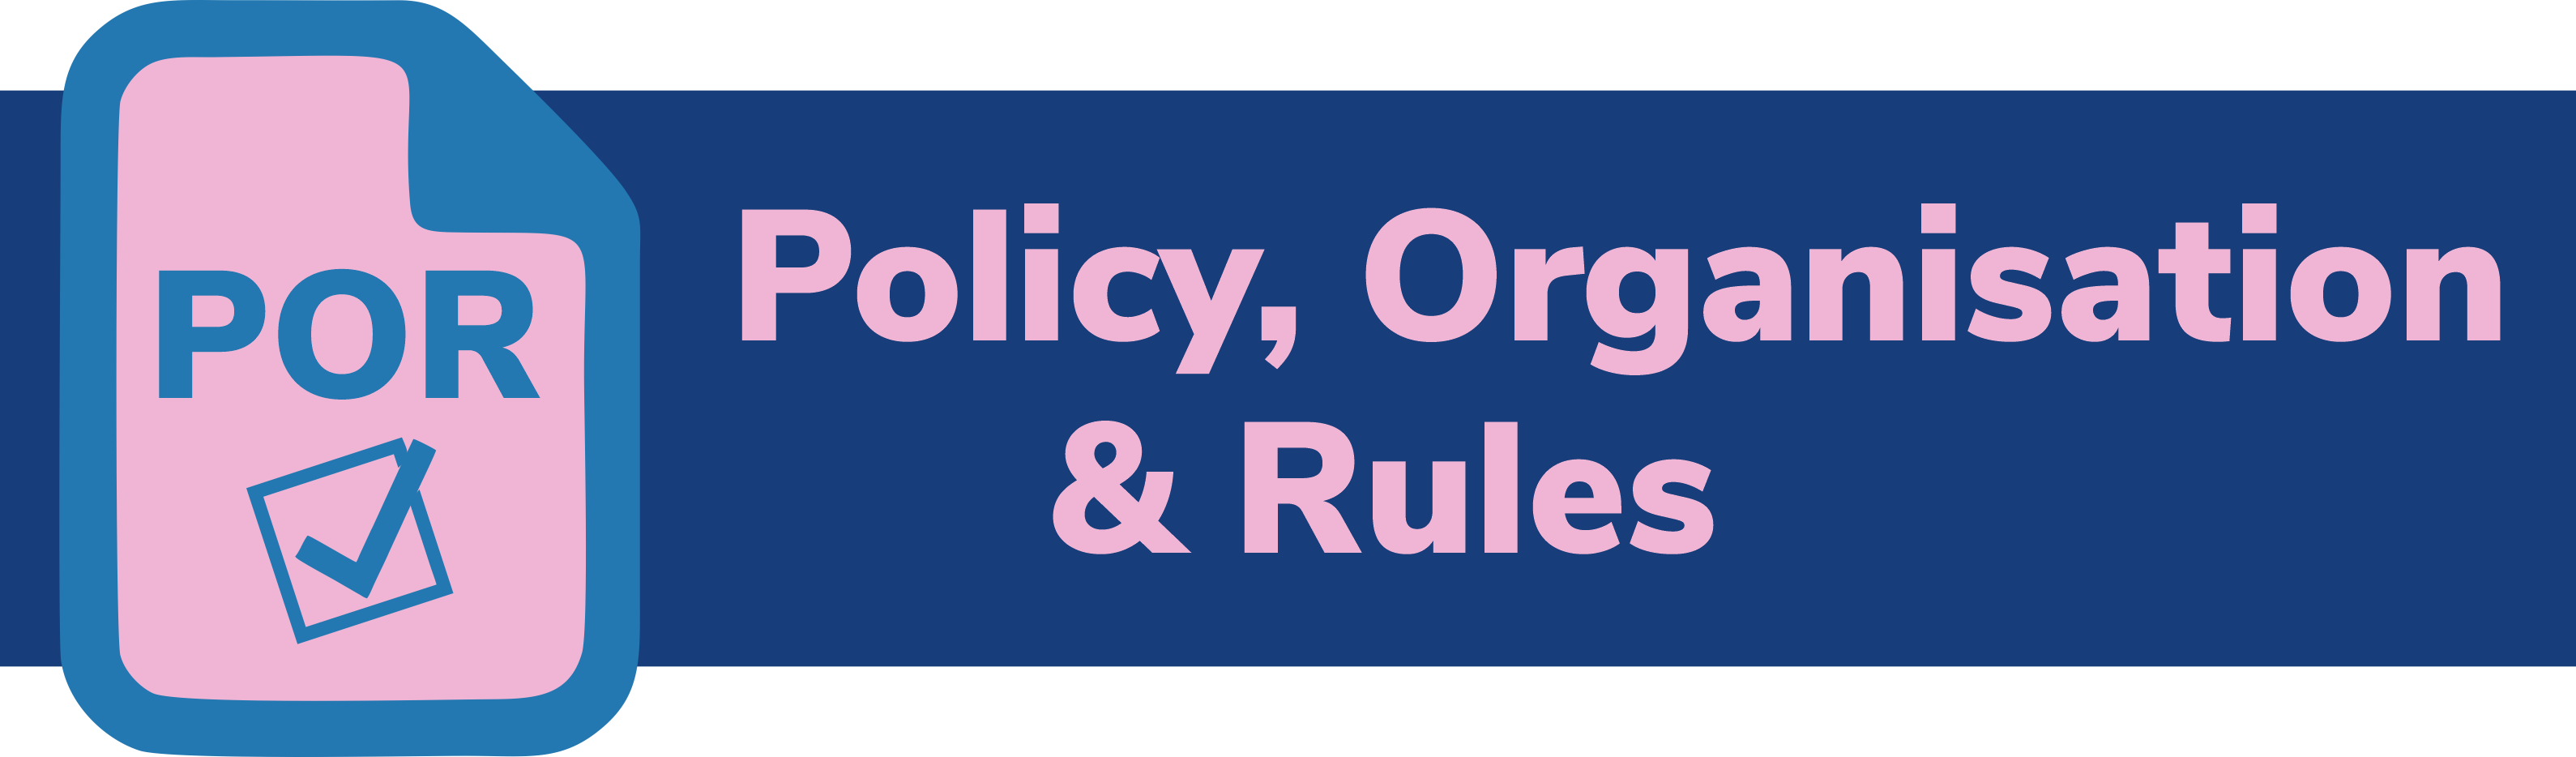 Policy, Organisation & Rules (POR)